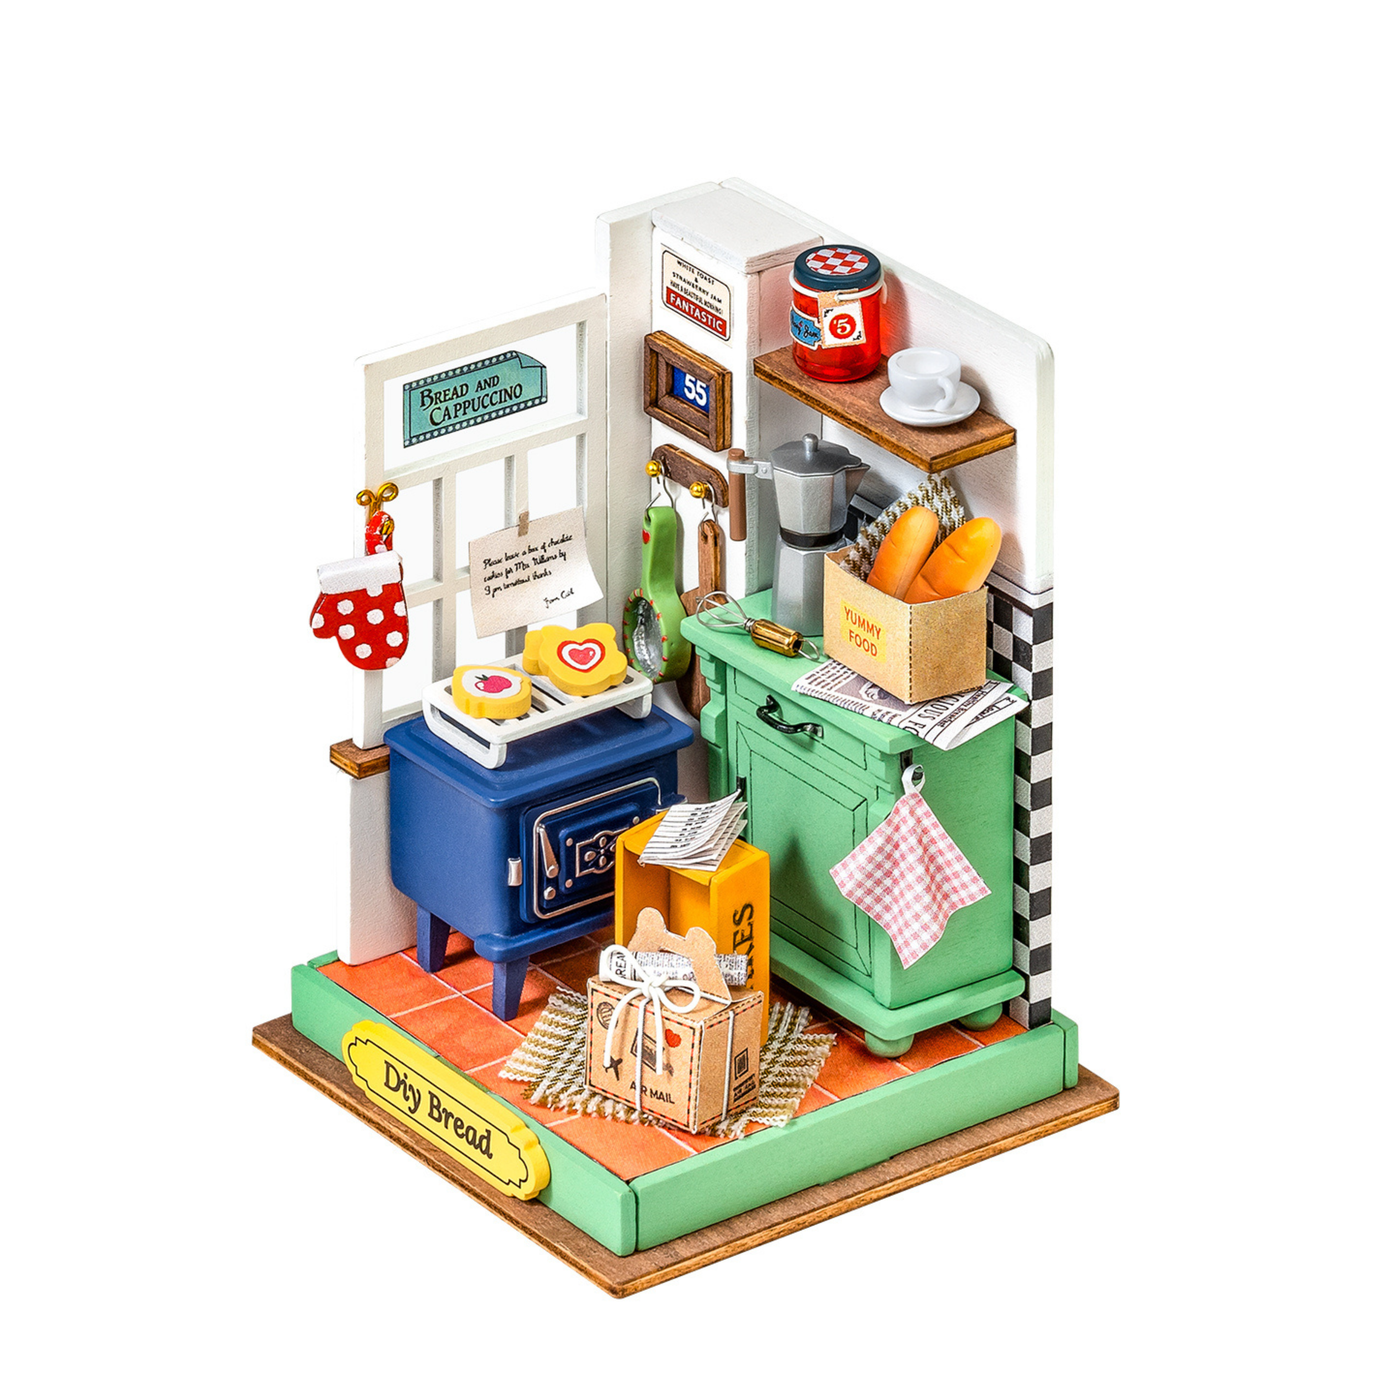 Afternoon Baking Time: 3D Miniature House Kit